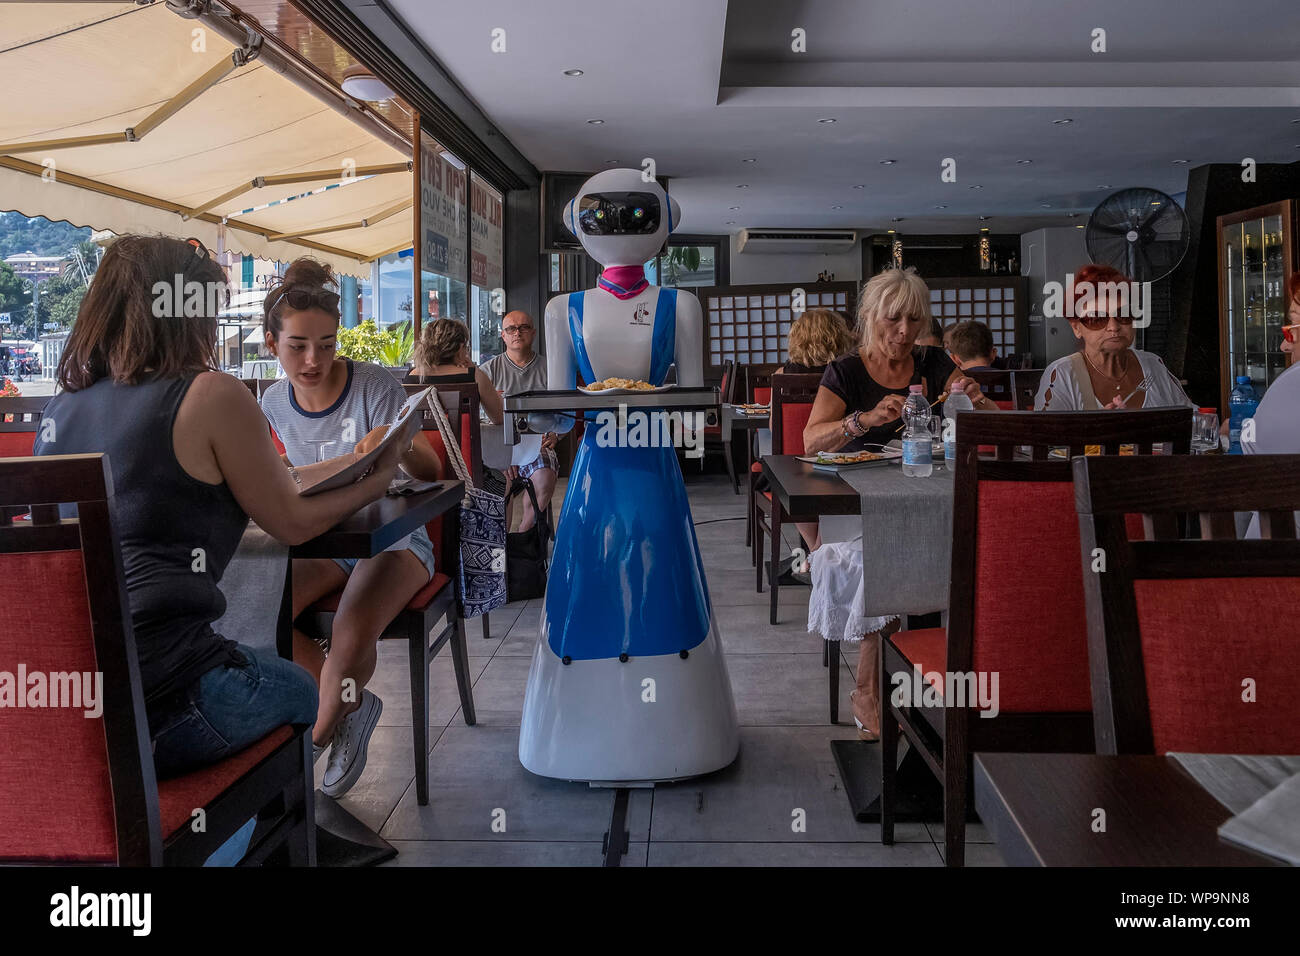 RAPALLO, ITALY - JULY 25: Waiter robot brings the dishes on July 25, 2019 in Rapallo, Italy. The 'Gran Caff Rapallo' restaurant in Liguria is the fir Stock Photo